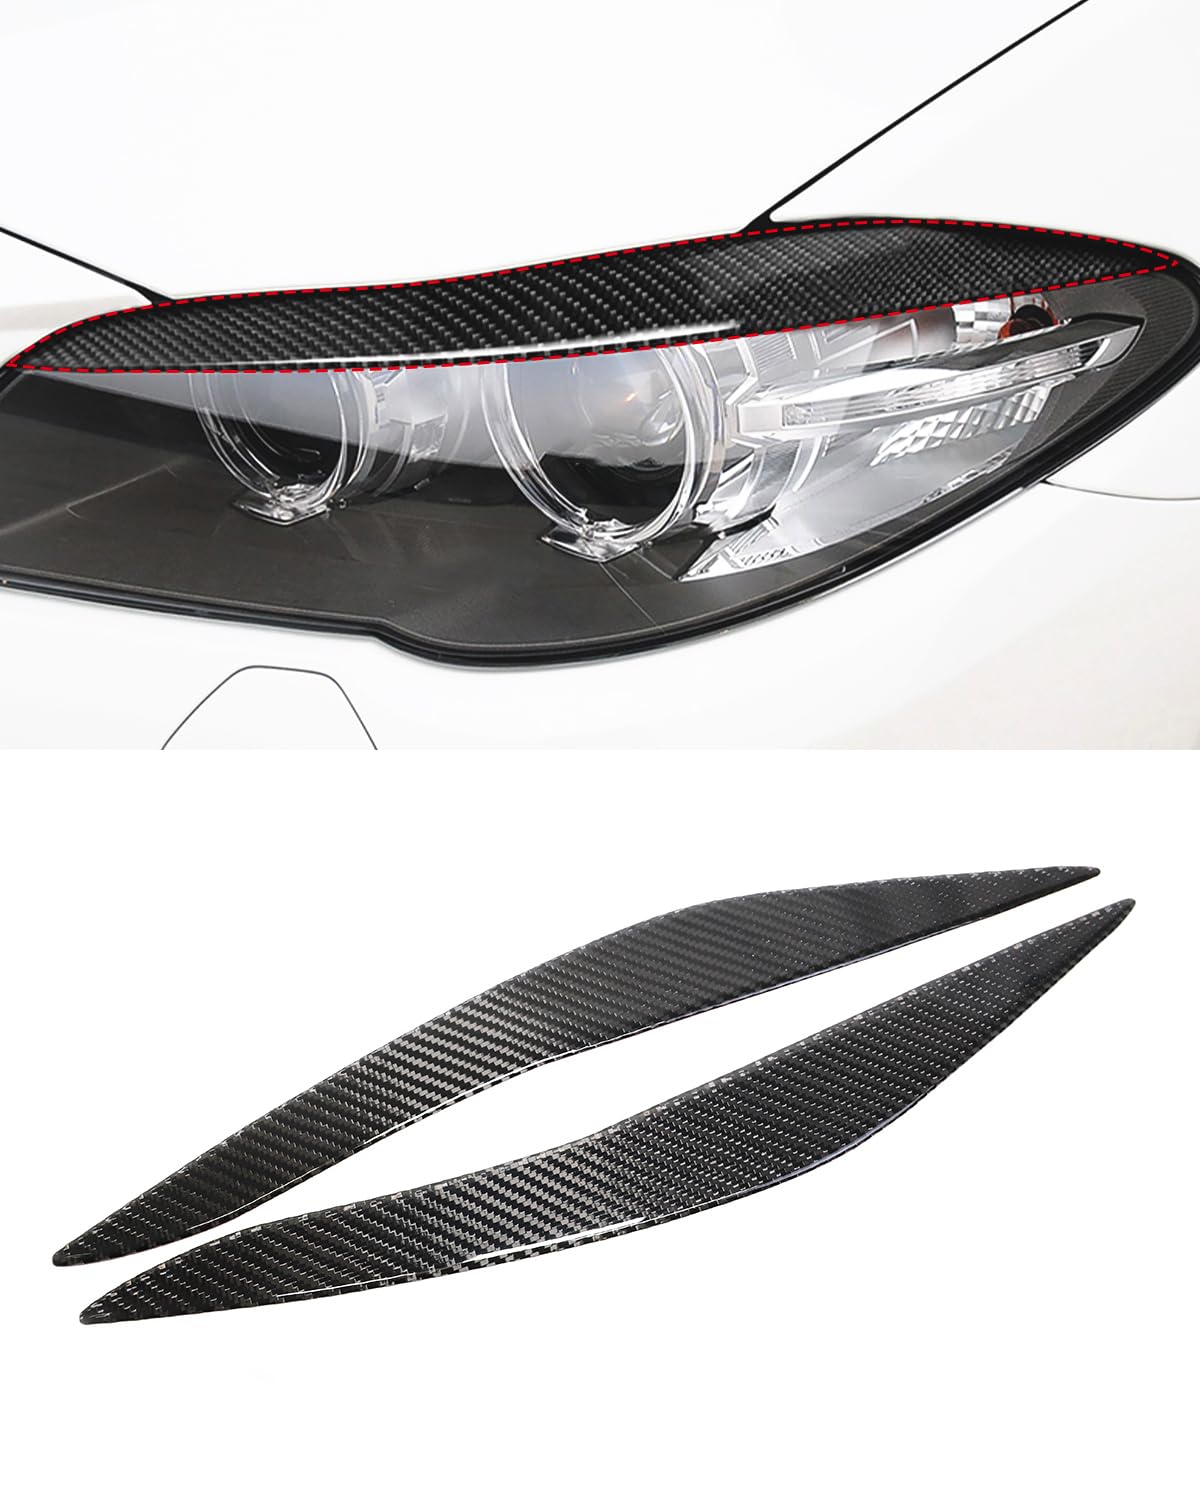 Real Carbon Fiber Car Headlight Eyebrow Decoration Strip Front Head Lamp Eyelid Cover Trim Sticker for BMW 5 Series F10 2010-2016 (Will NOT FIT GT Model) von SHSBSCAR